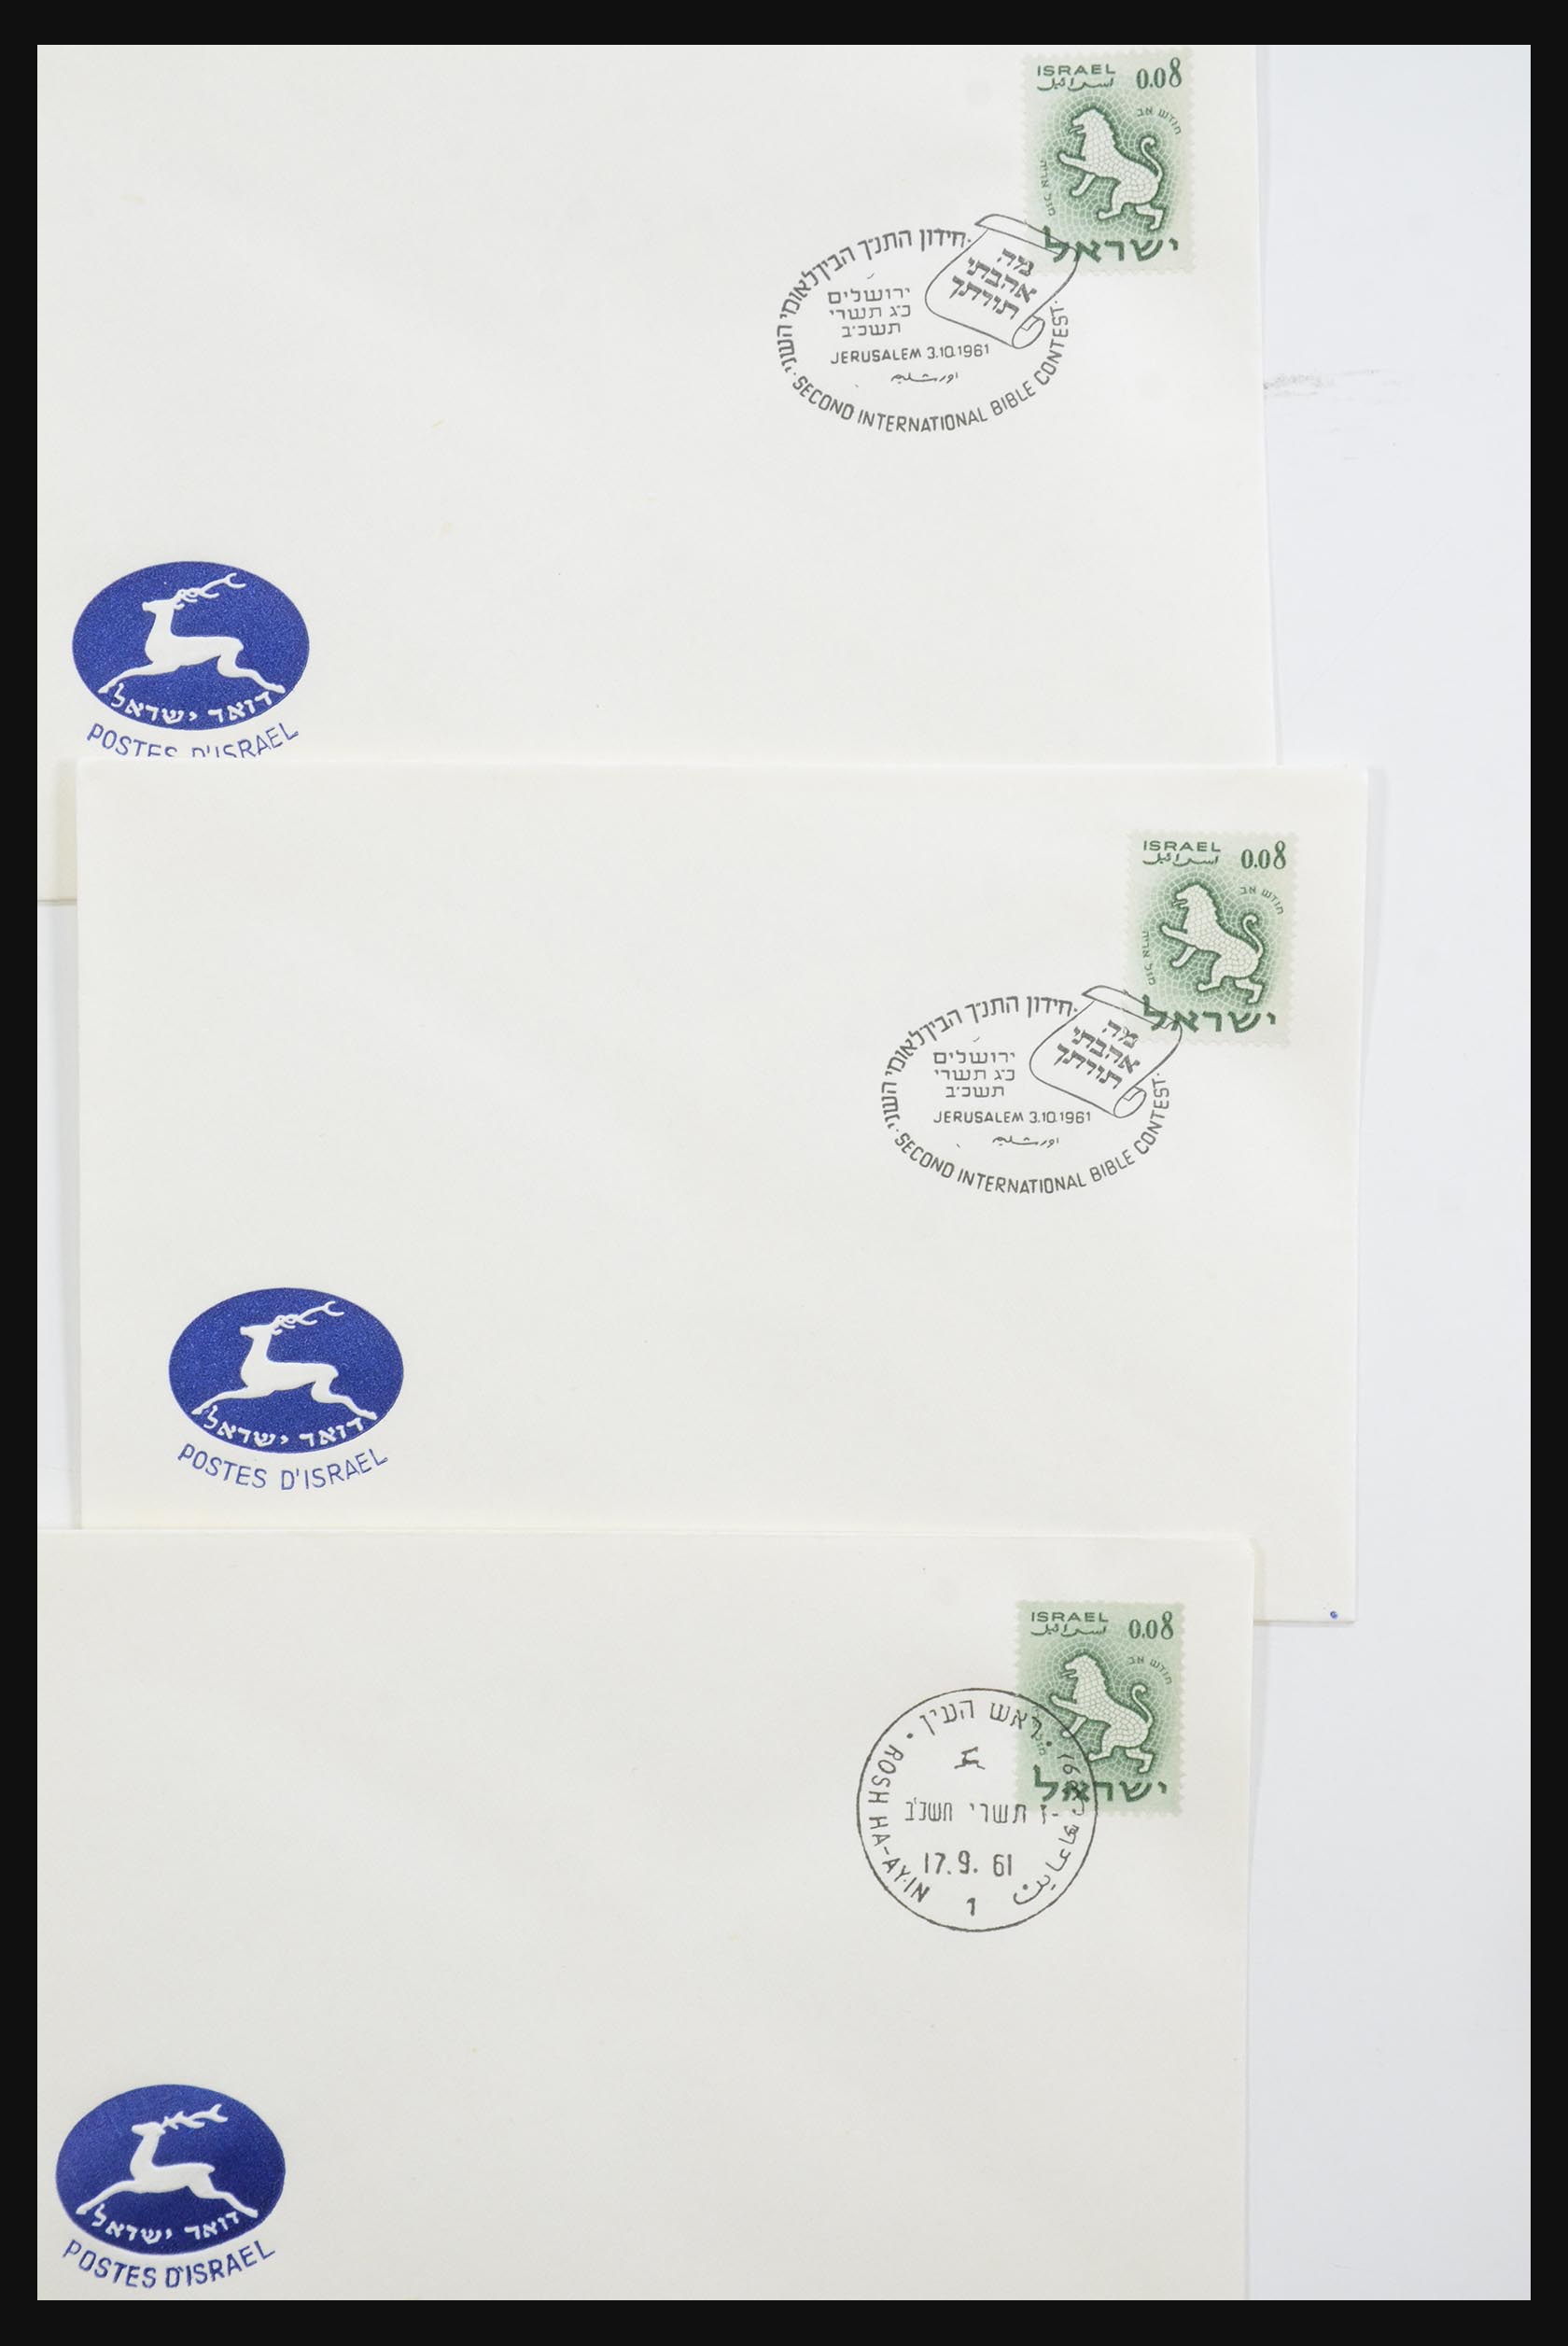 31924 032 - 31924 Israel first day cover collection 1957-2003.